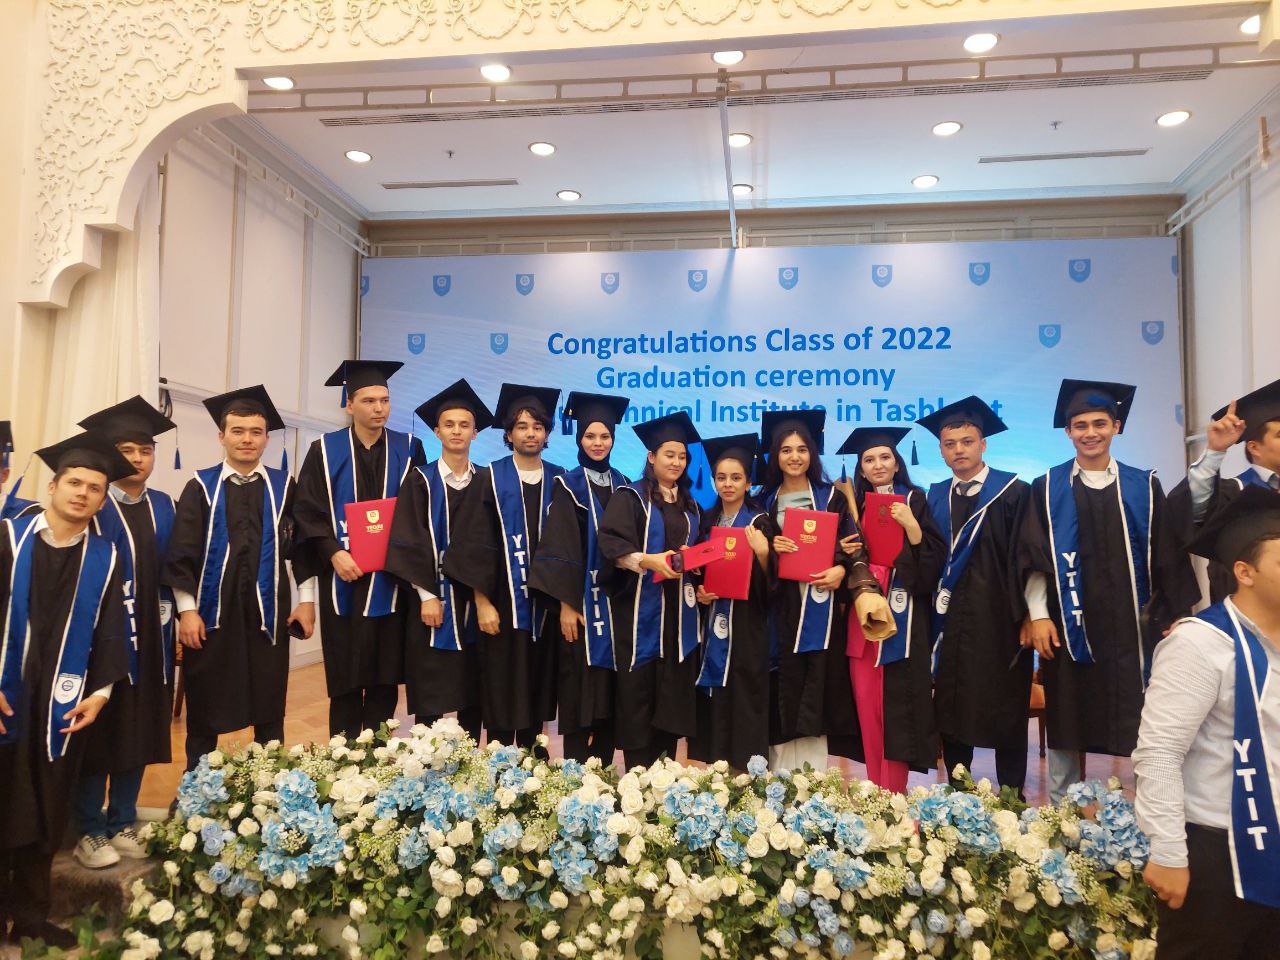 ON JULY 22 OF THIS YEAR, A SOLEMN DEGREE AWARDING CEREMONY TO THE FIRST GRADUATING STUDENTS WAS HELD AT THE YEOJU TECHNICAL INSTITUTE IN TASHKENT